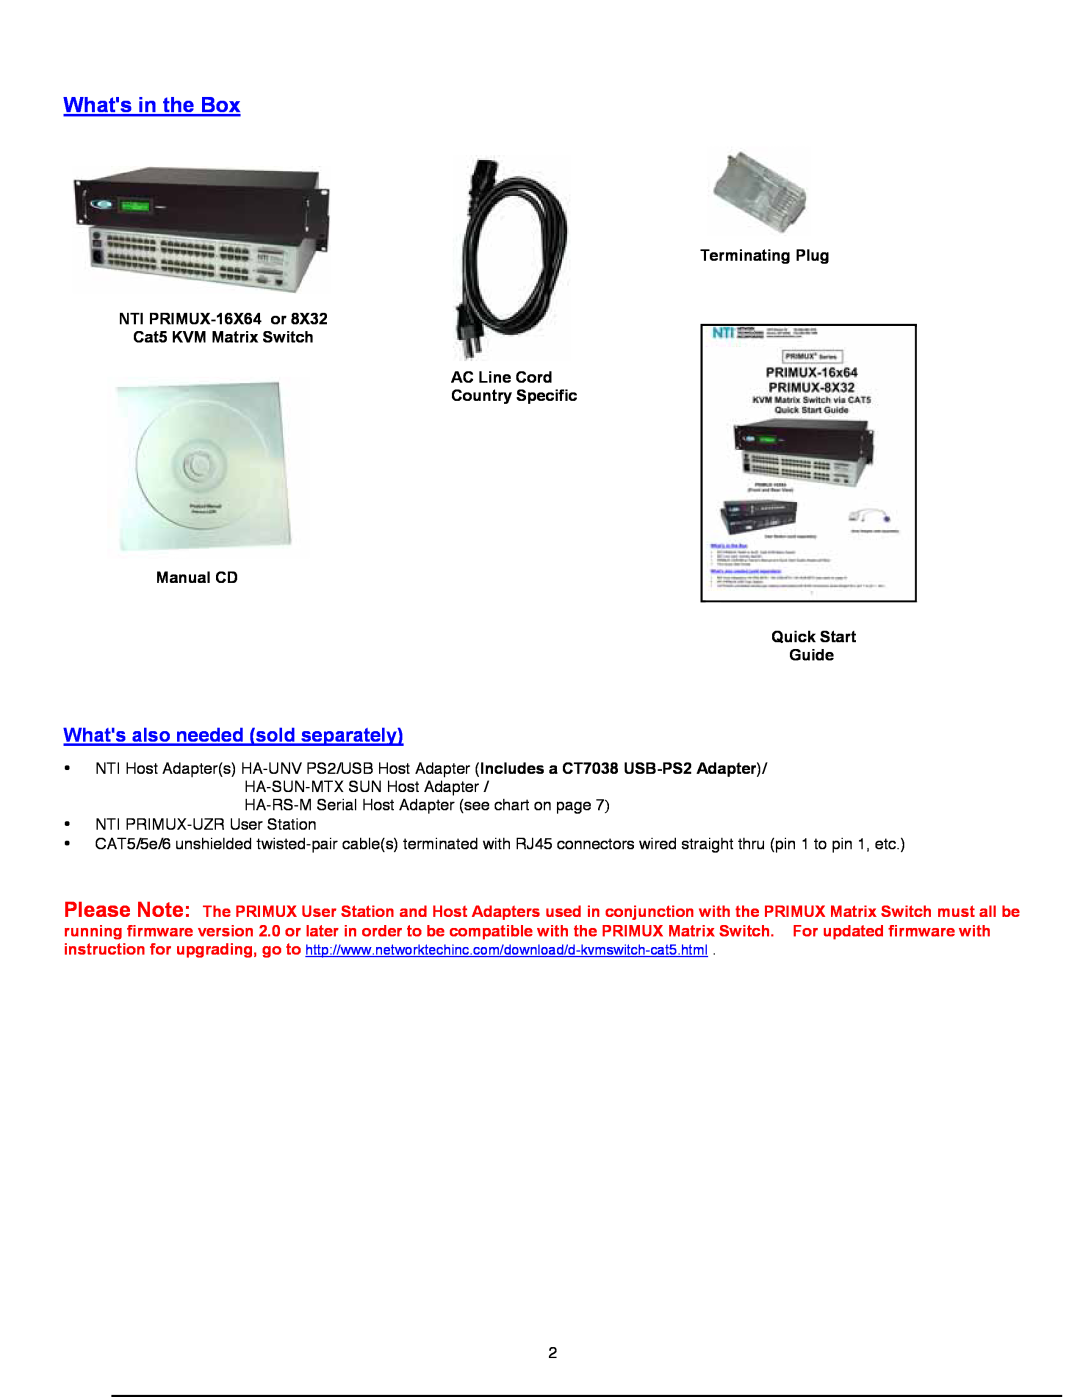 Network Technologies Primus-16X64 quick start Whats in the Box, Whats also needed sold separately 